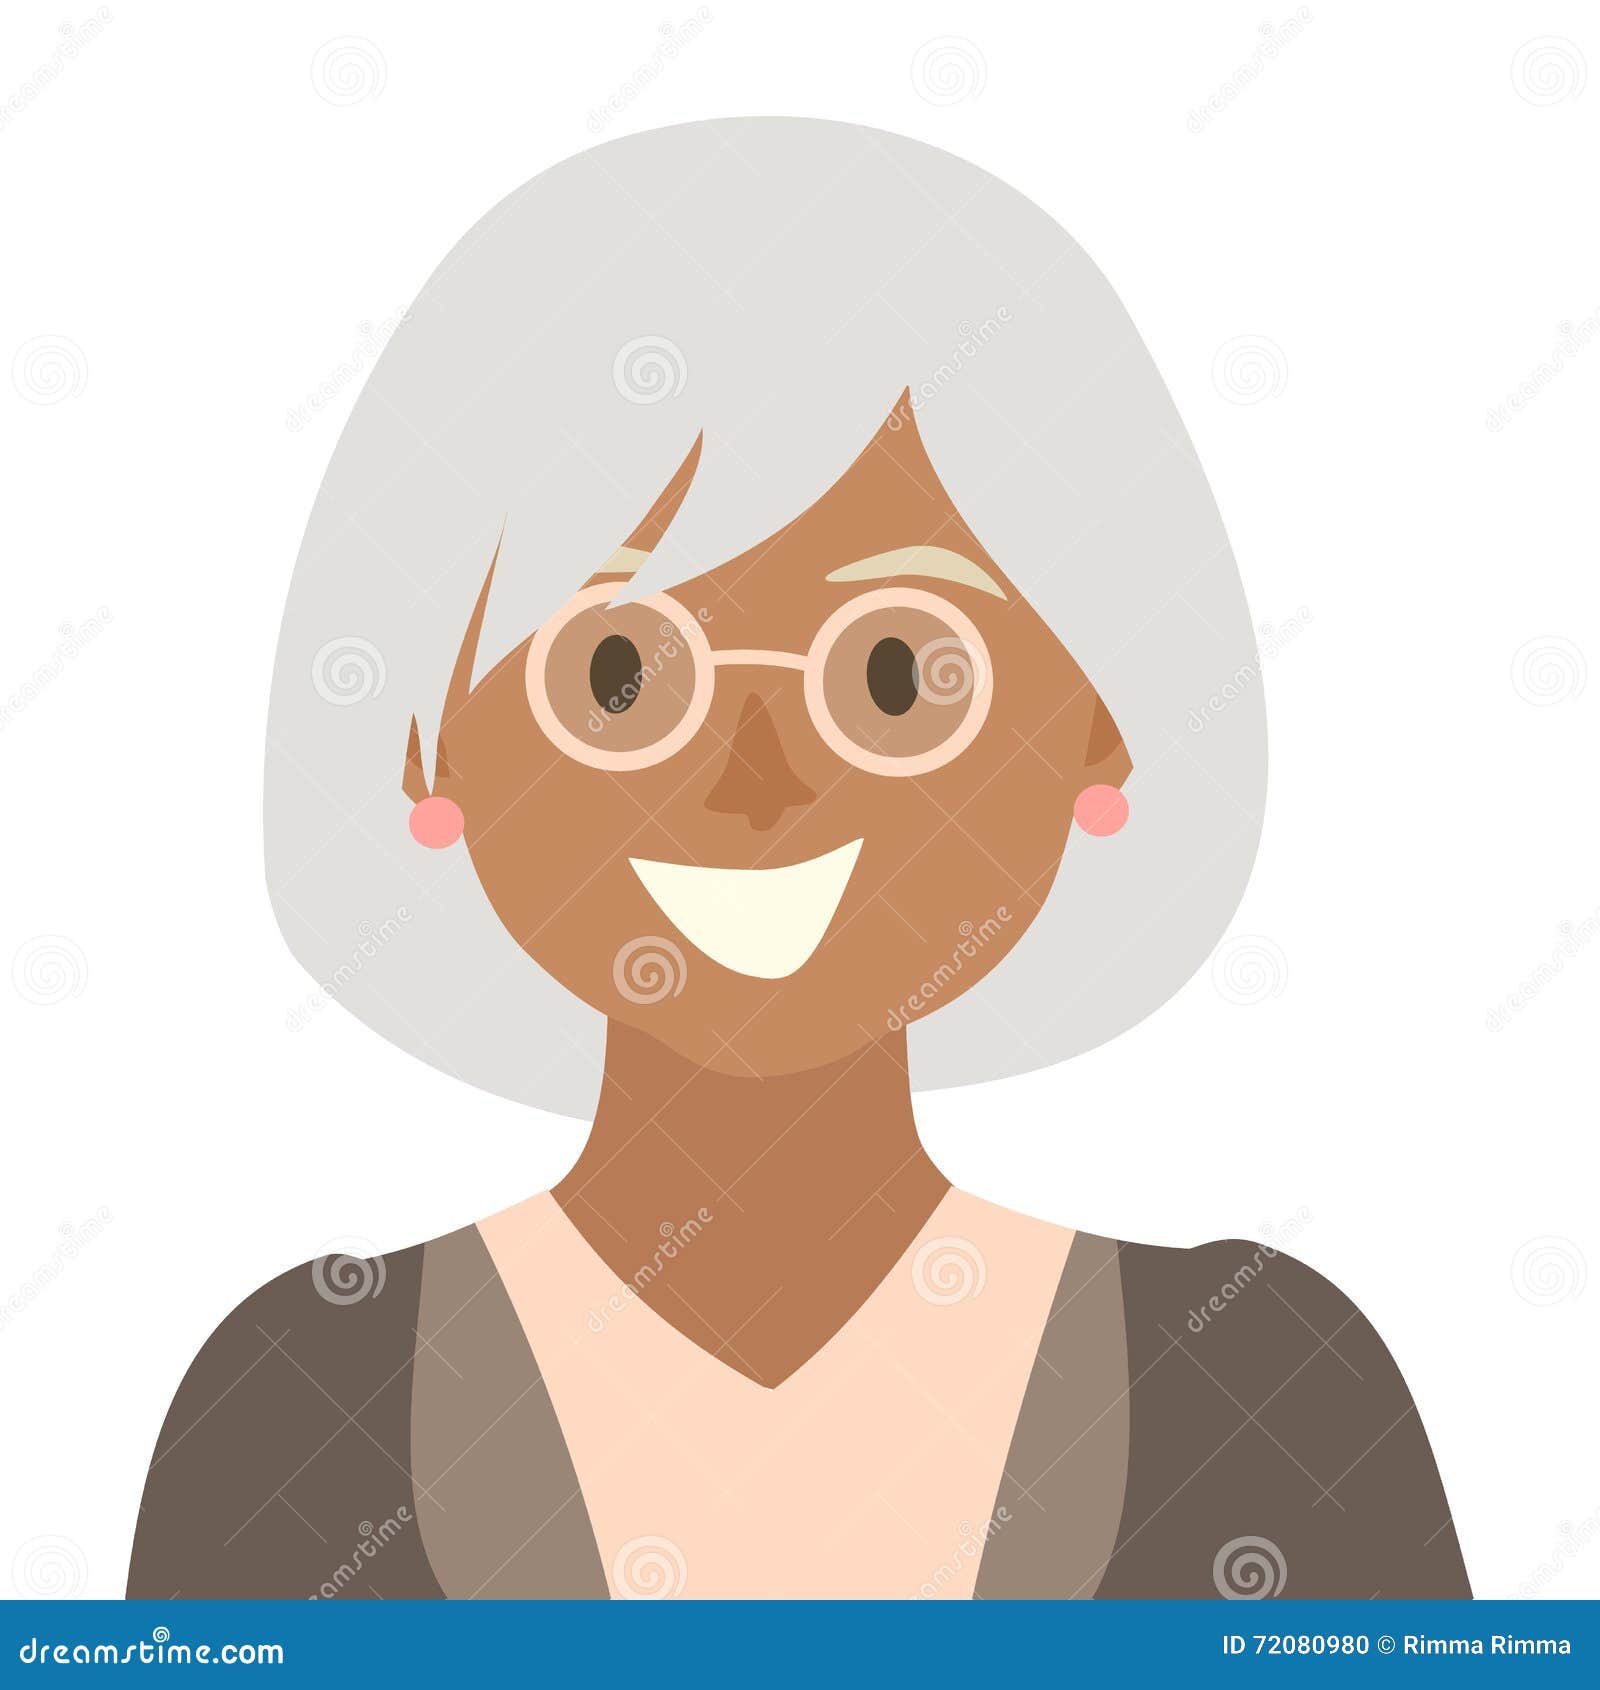 Download Old Woman Icon Vector.Woman Icon Illustration Stock Vector - Illustration of couple, flat: 72080980